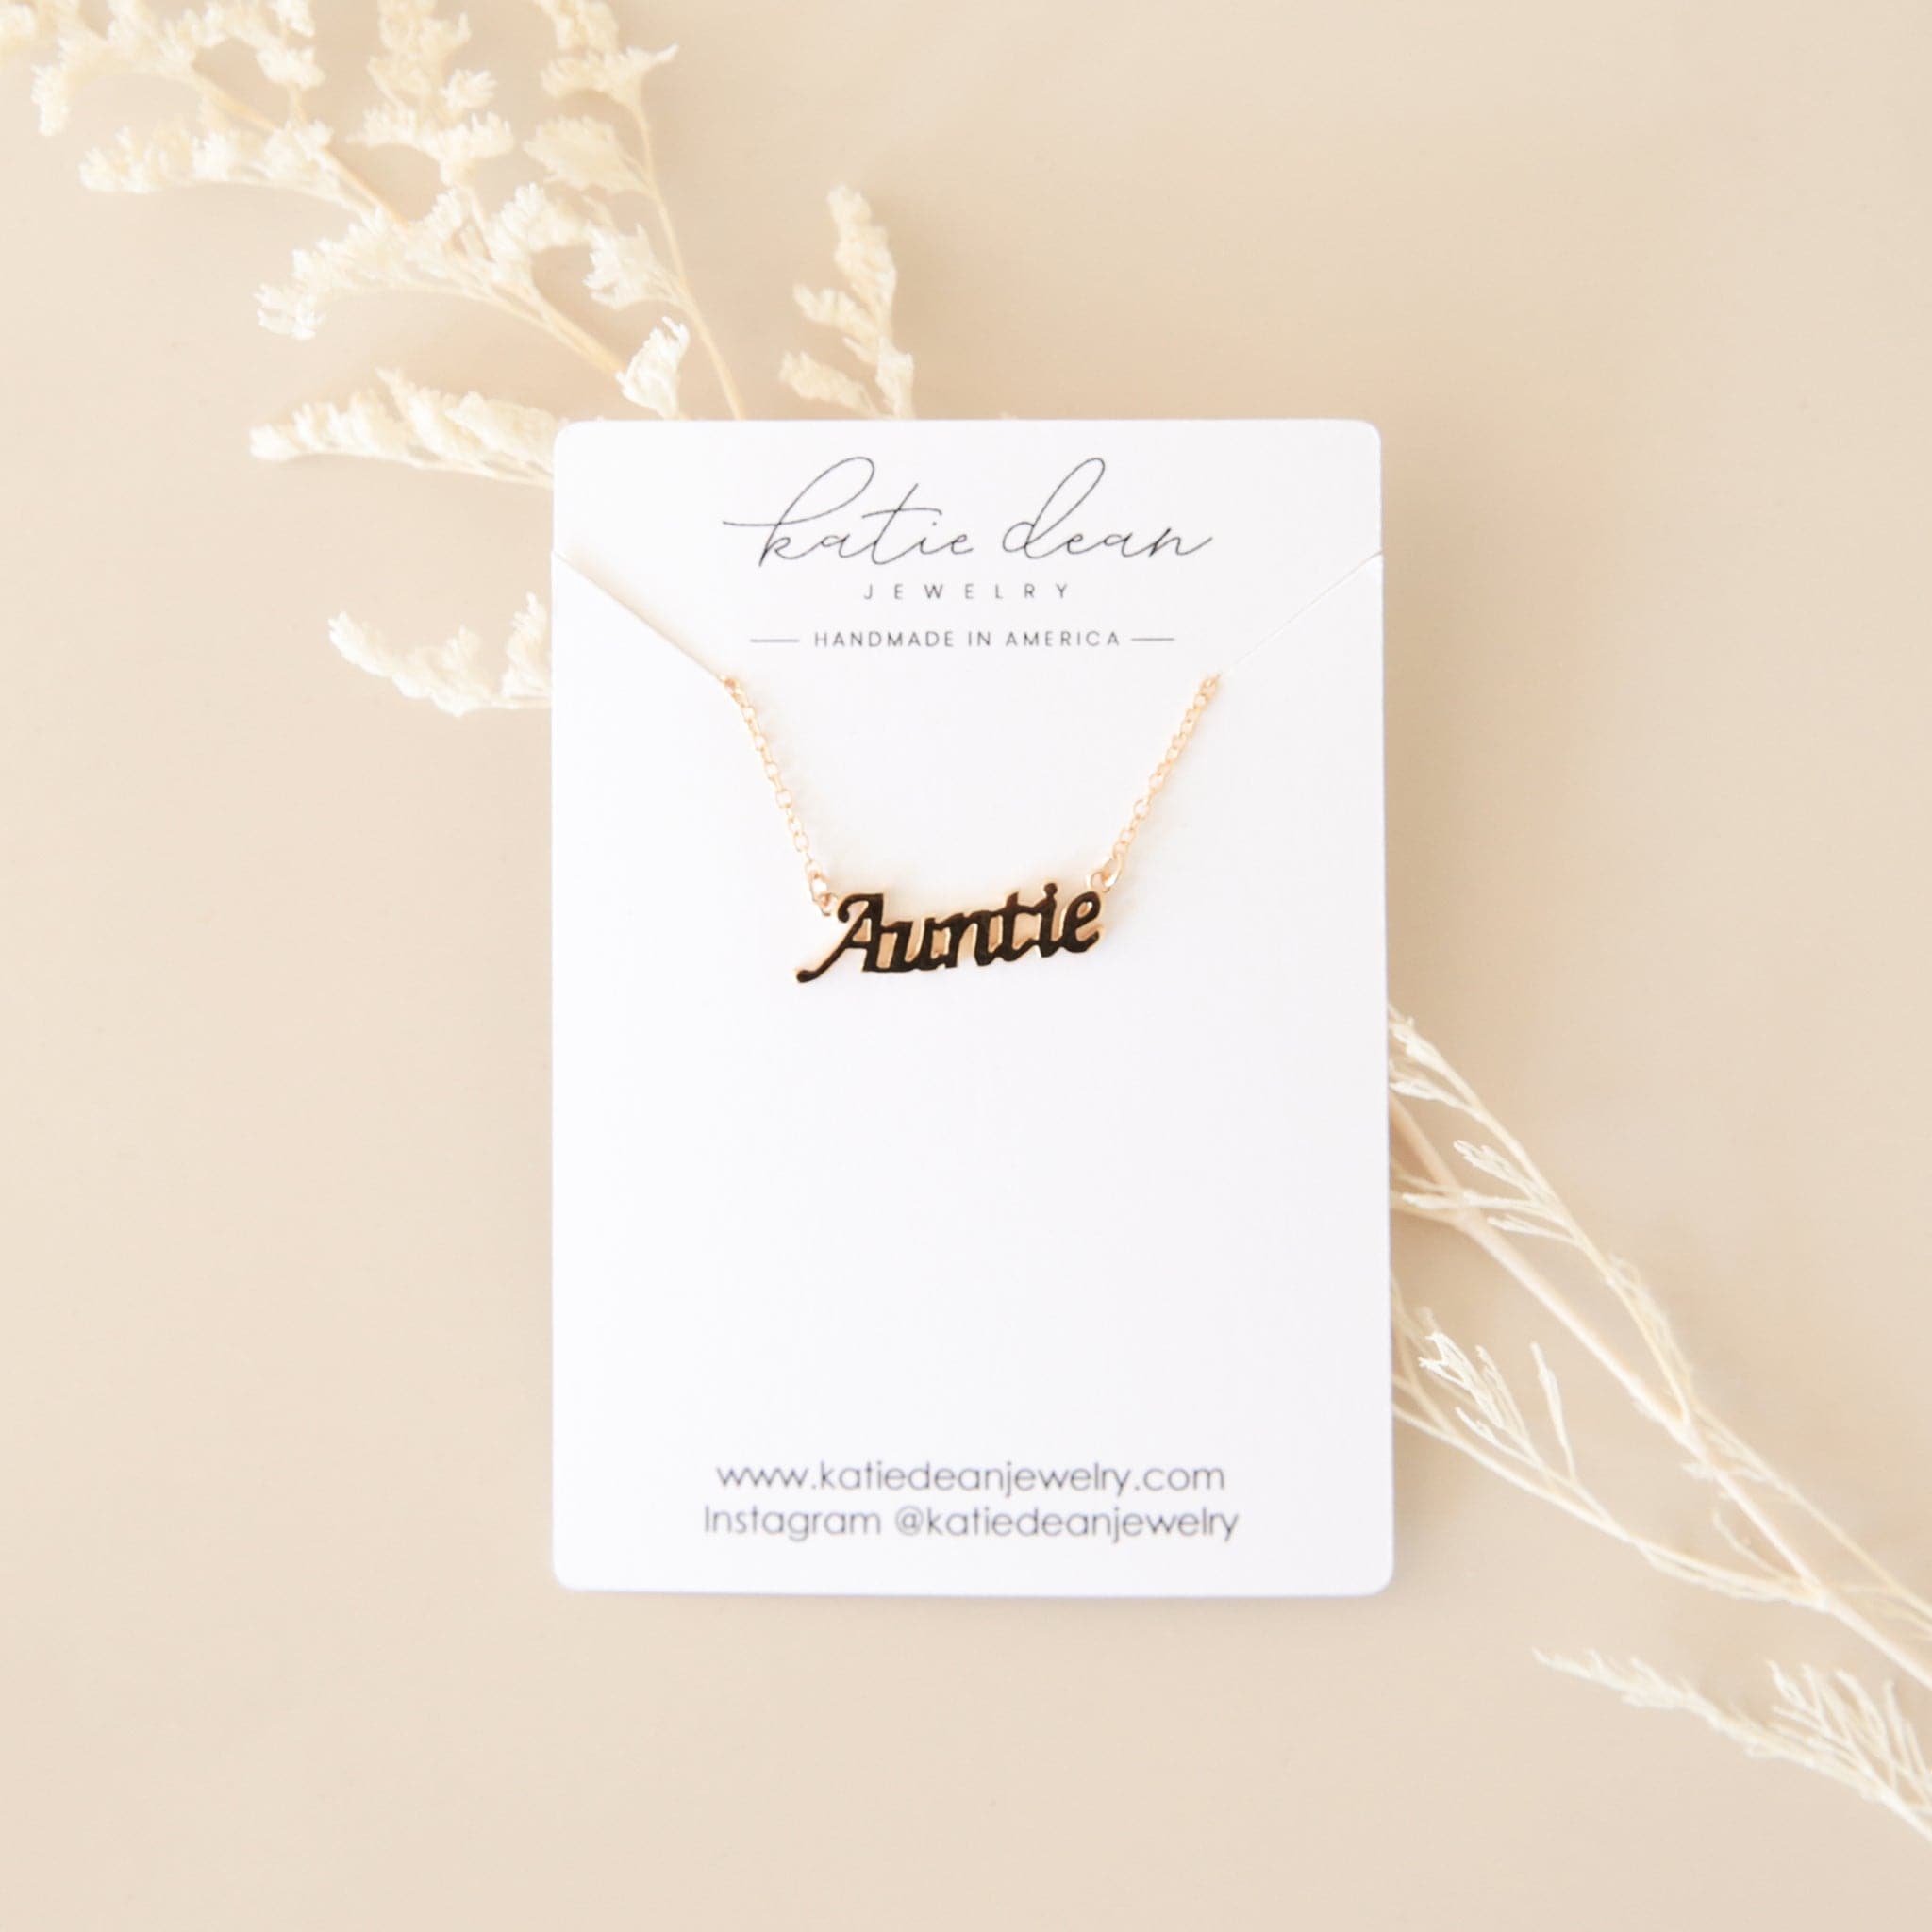 &quot;Katie Dear Jewelry&quot; white card with gold necklace in the shape of the word &quot;Auntie&quot;